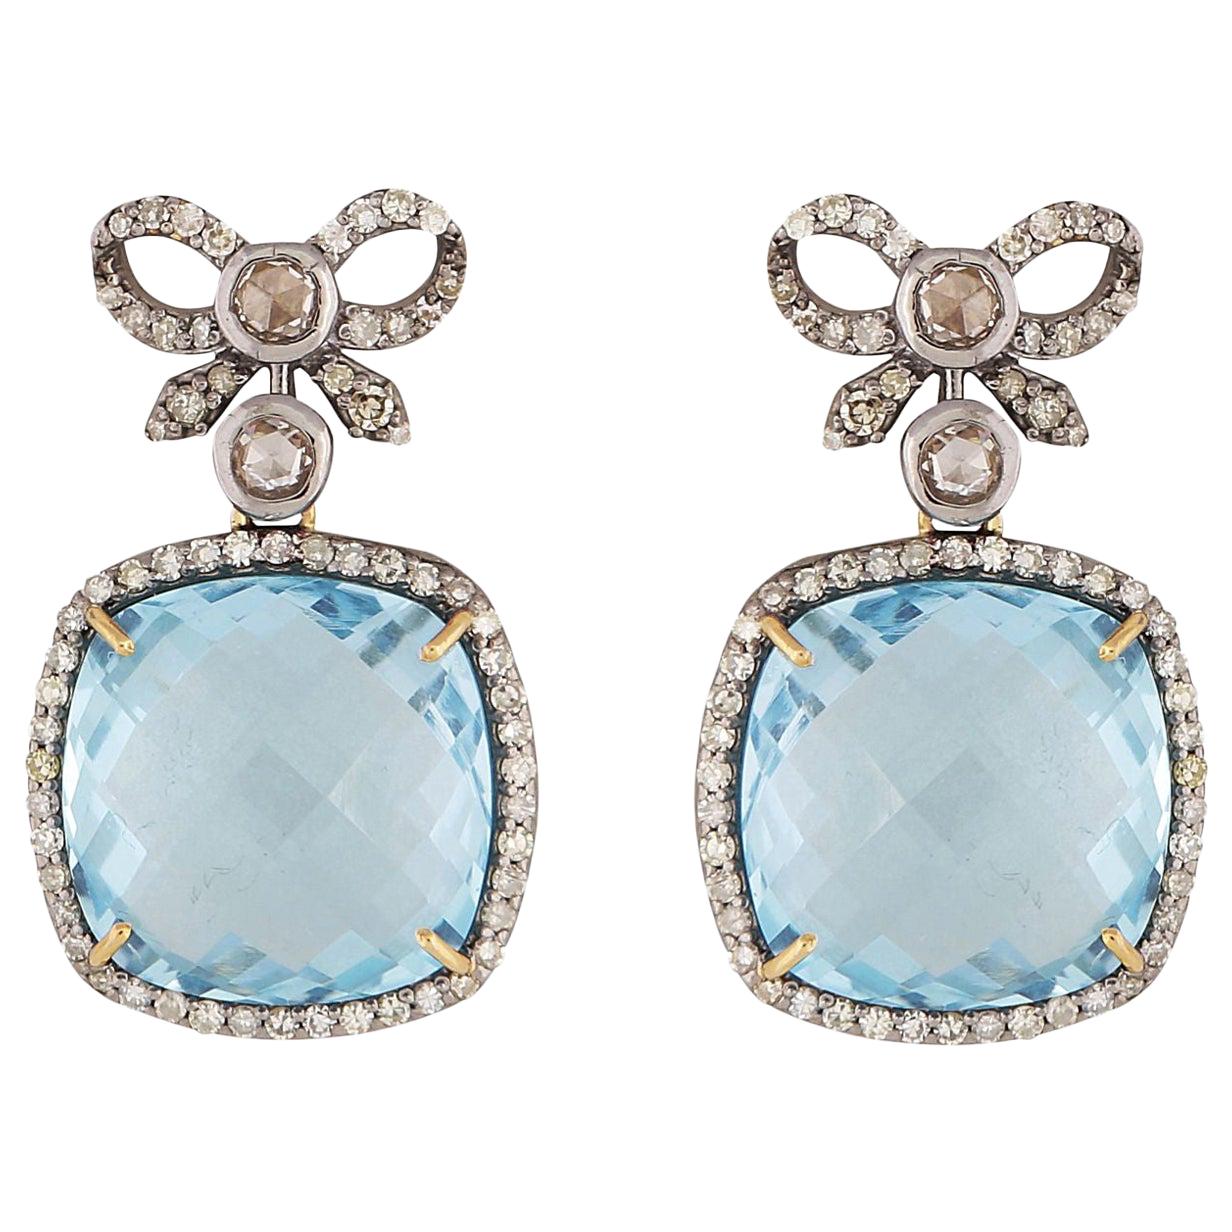 Art Deco Vintage Inspired Bow Earrings with Blue Topaz and Diamonds